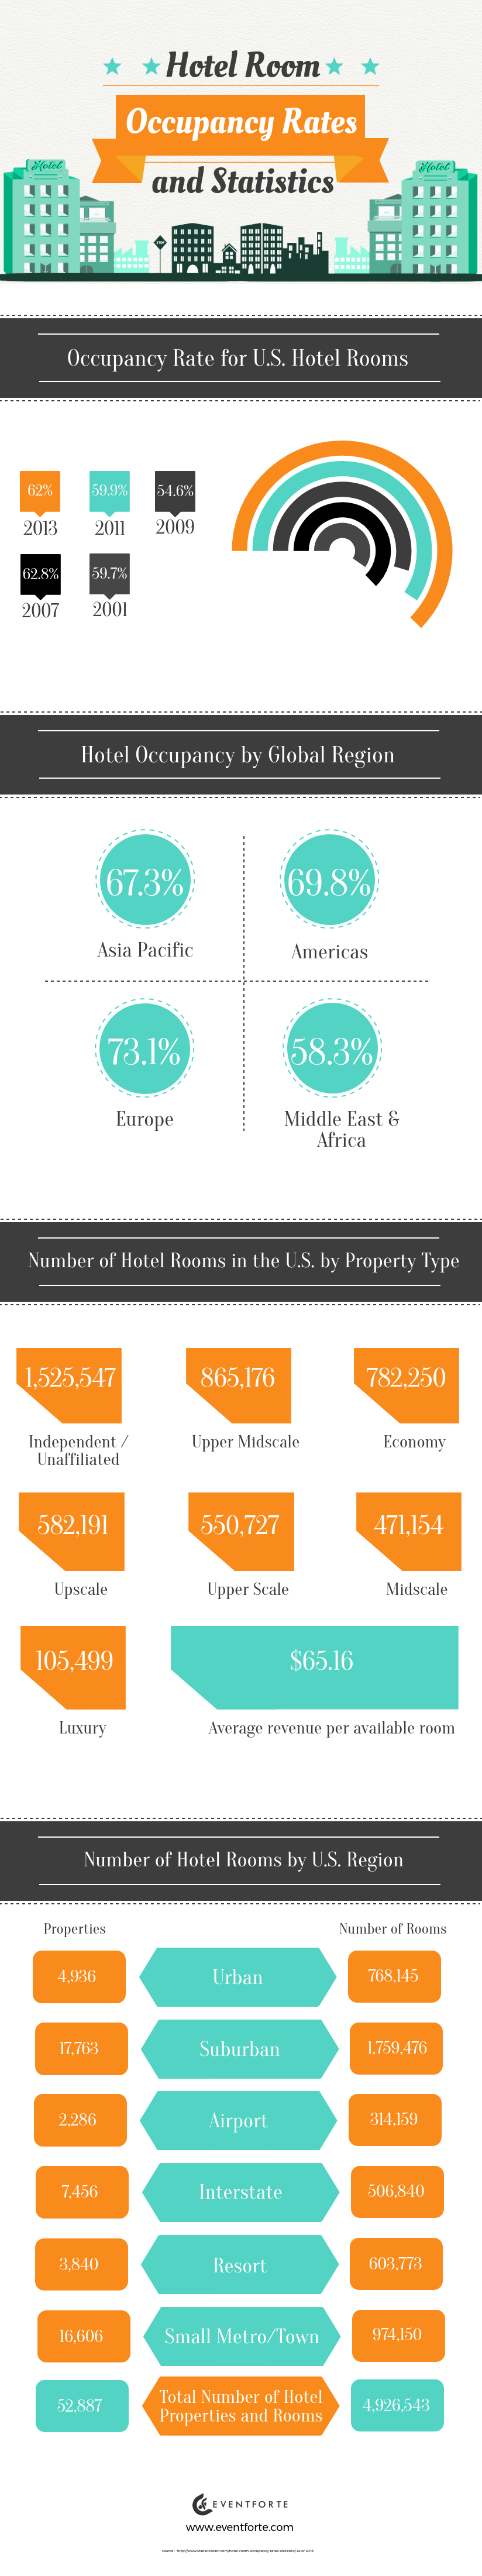 Hotel Room Occupancy Rates and Statistics